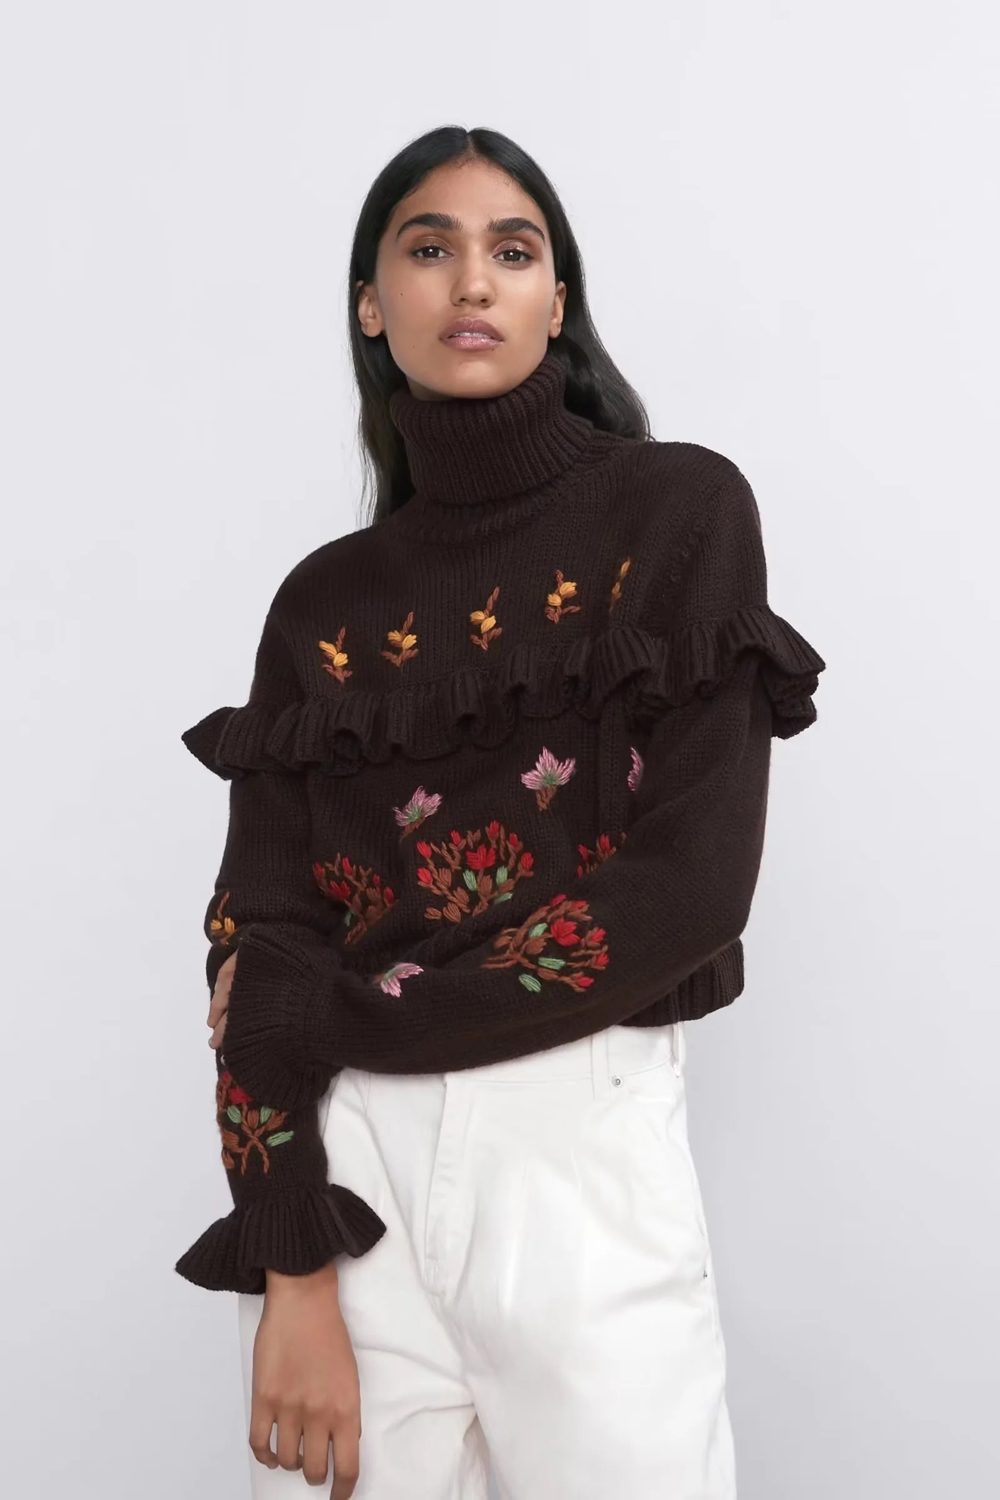 Fashion Dark Brown Acrylic Floral Embroidered Lace Turtleneck Sweater,Sweater